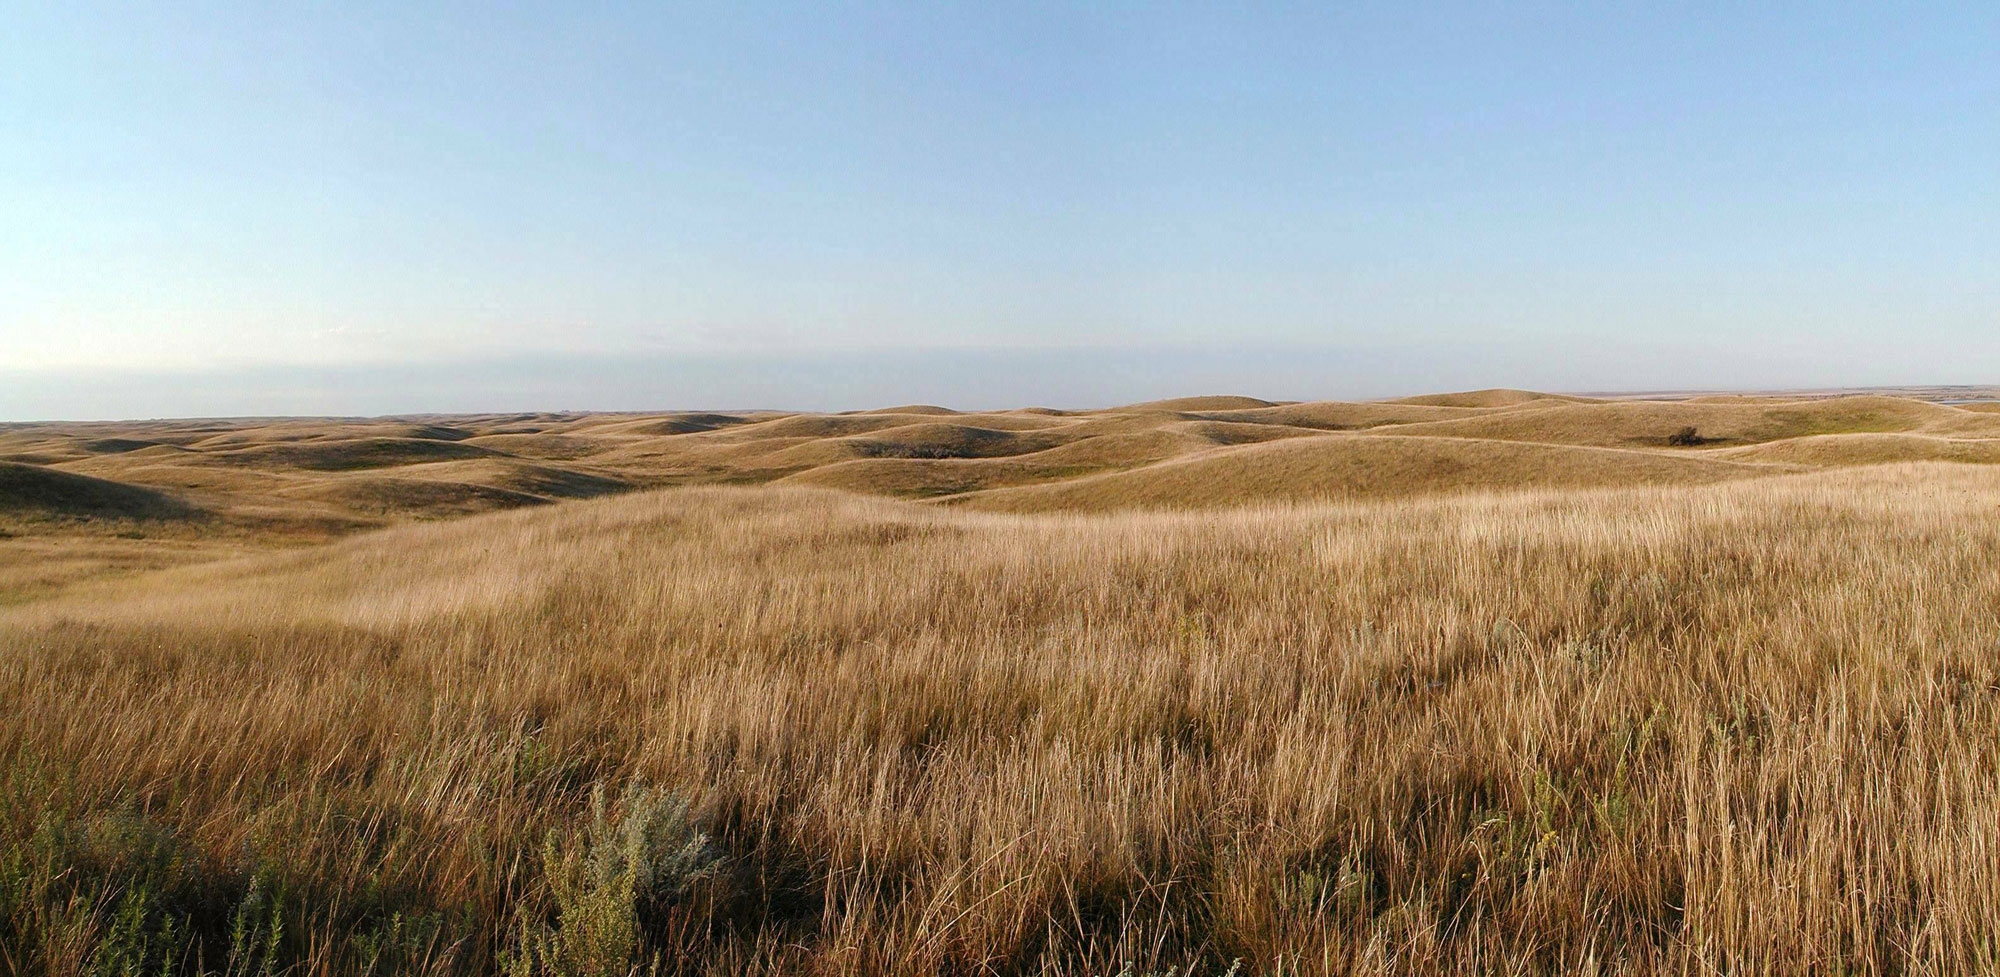 Photograph of prairie at Chase Lake Wildlife Refuge, North Dakota. The photo shows gently rolling hills covered with light brown grass stretching from the foreground to the horizon under a light blue, cloudless sky.